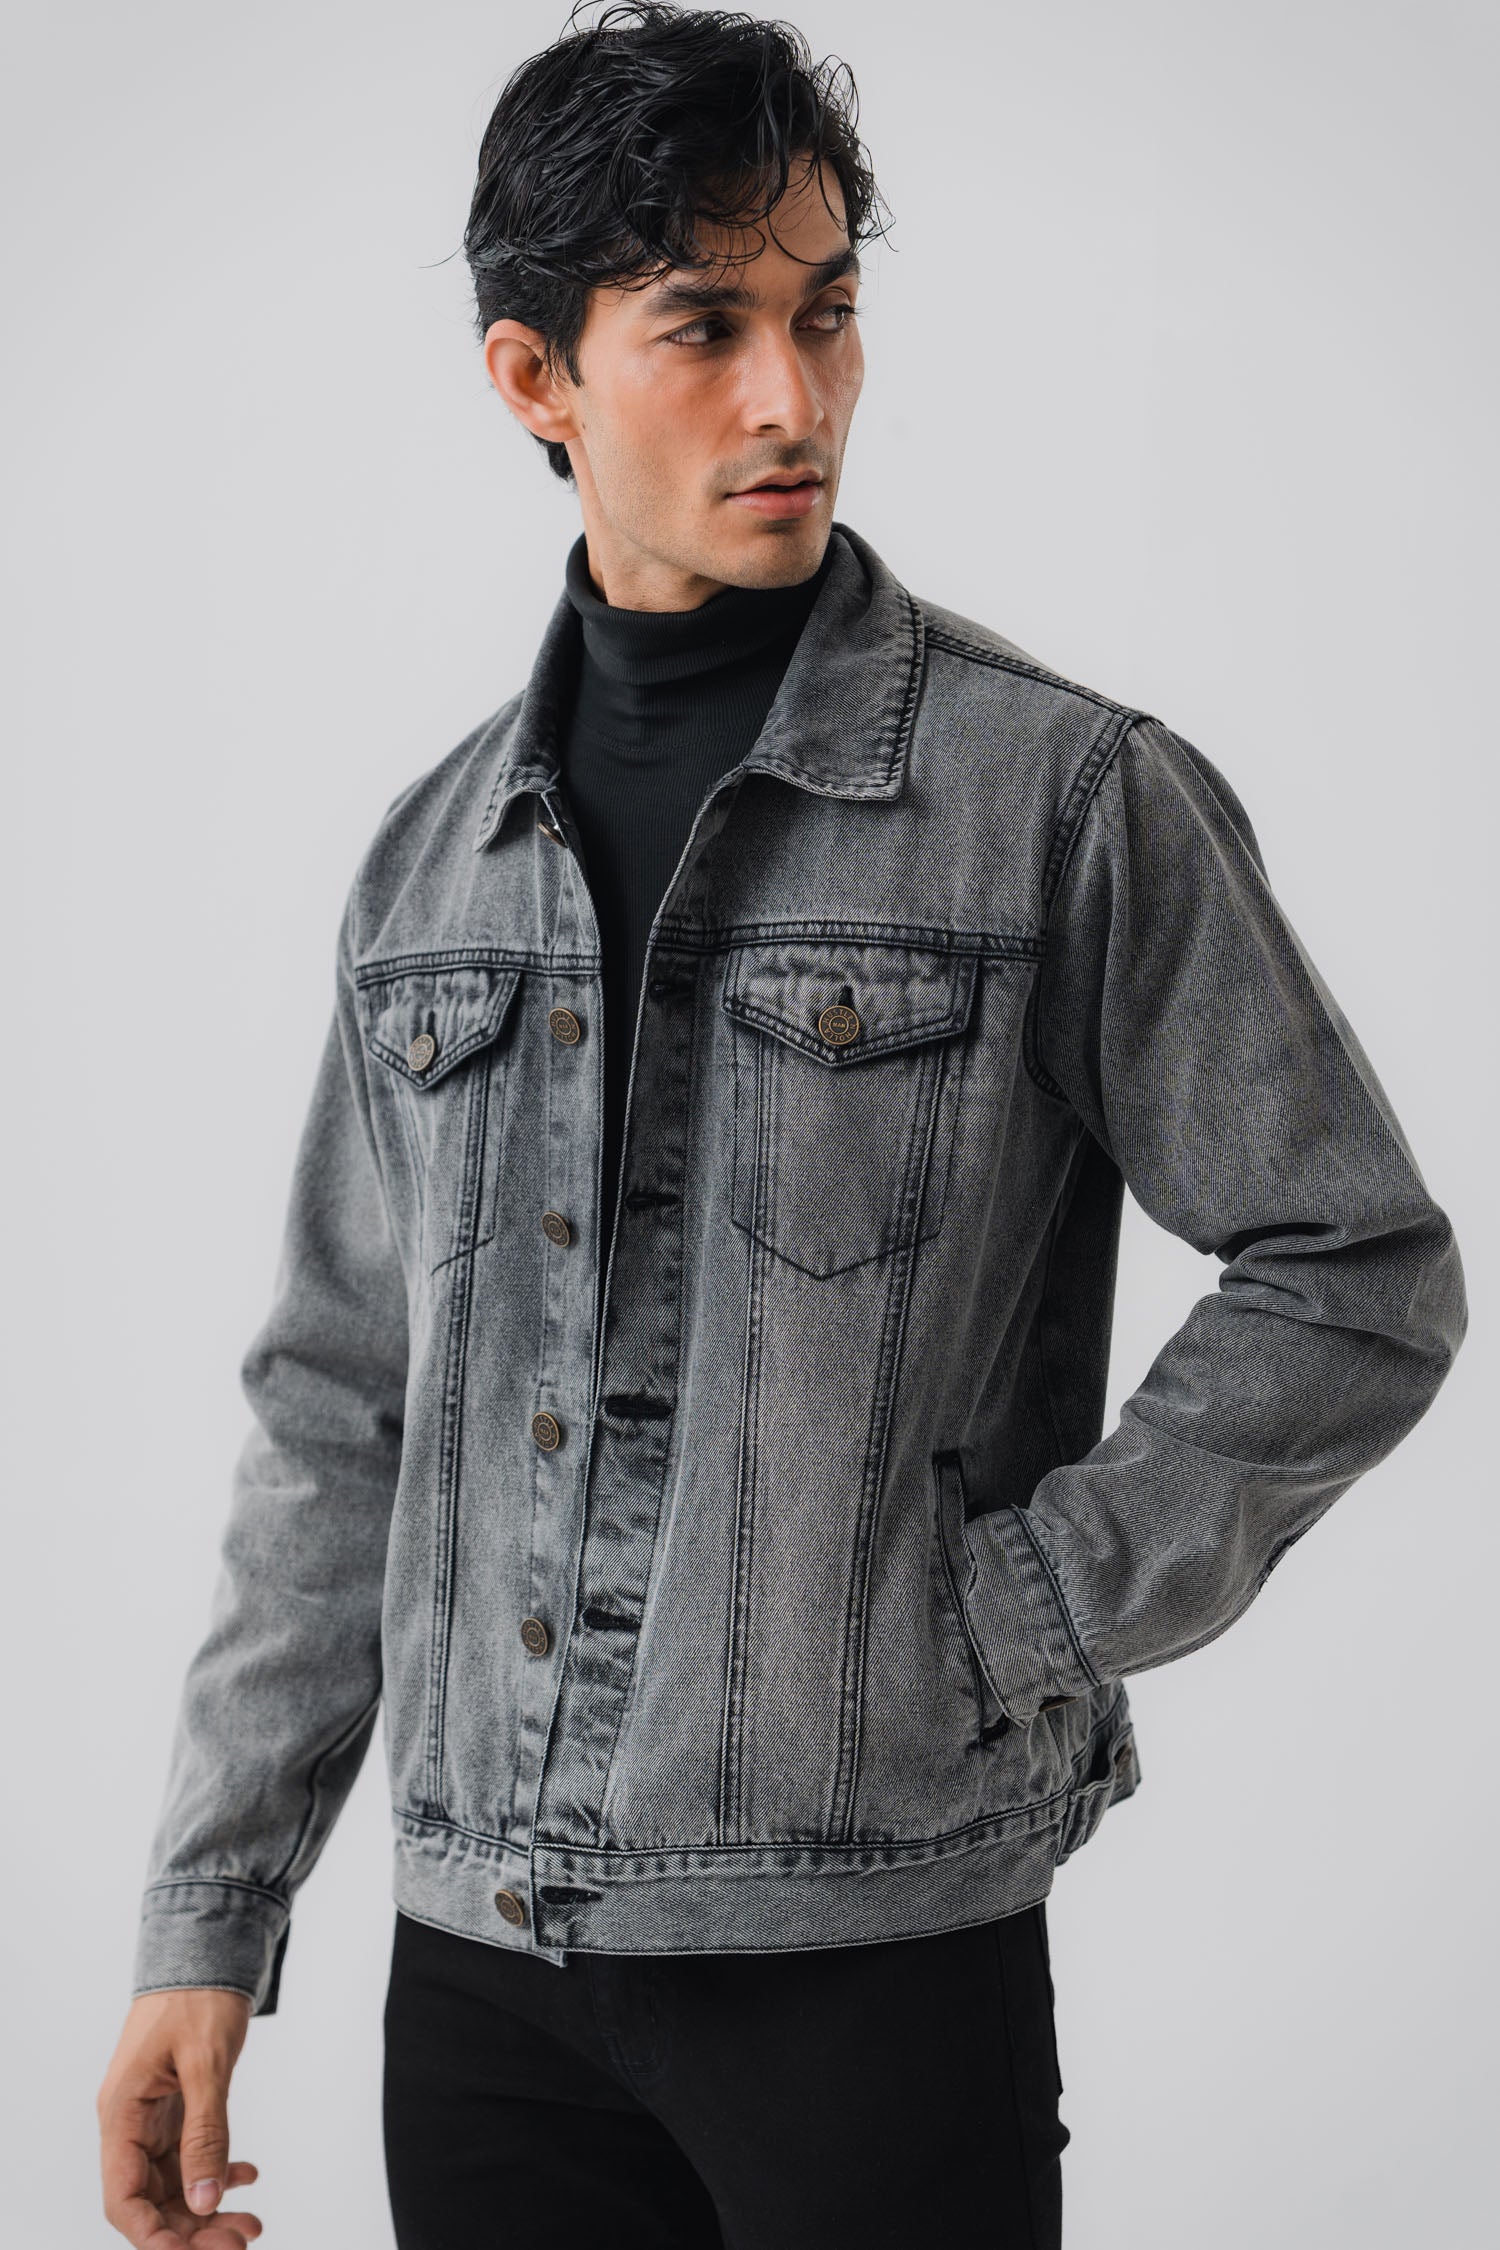 Men's Denim and faux leather jackets | Clothing - Gas Jeans – GAS Jeans